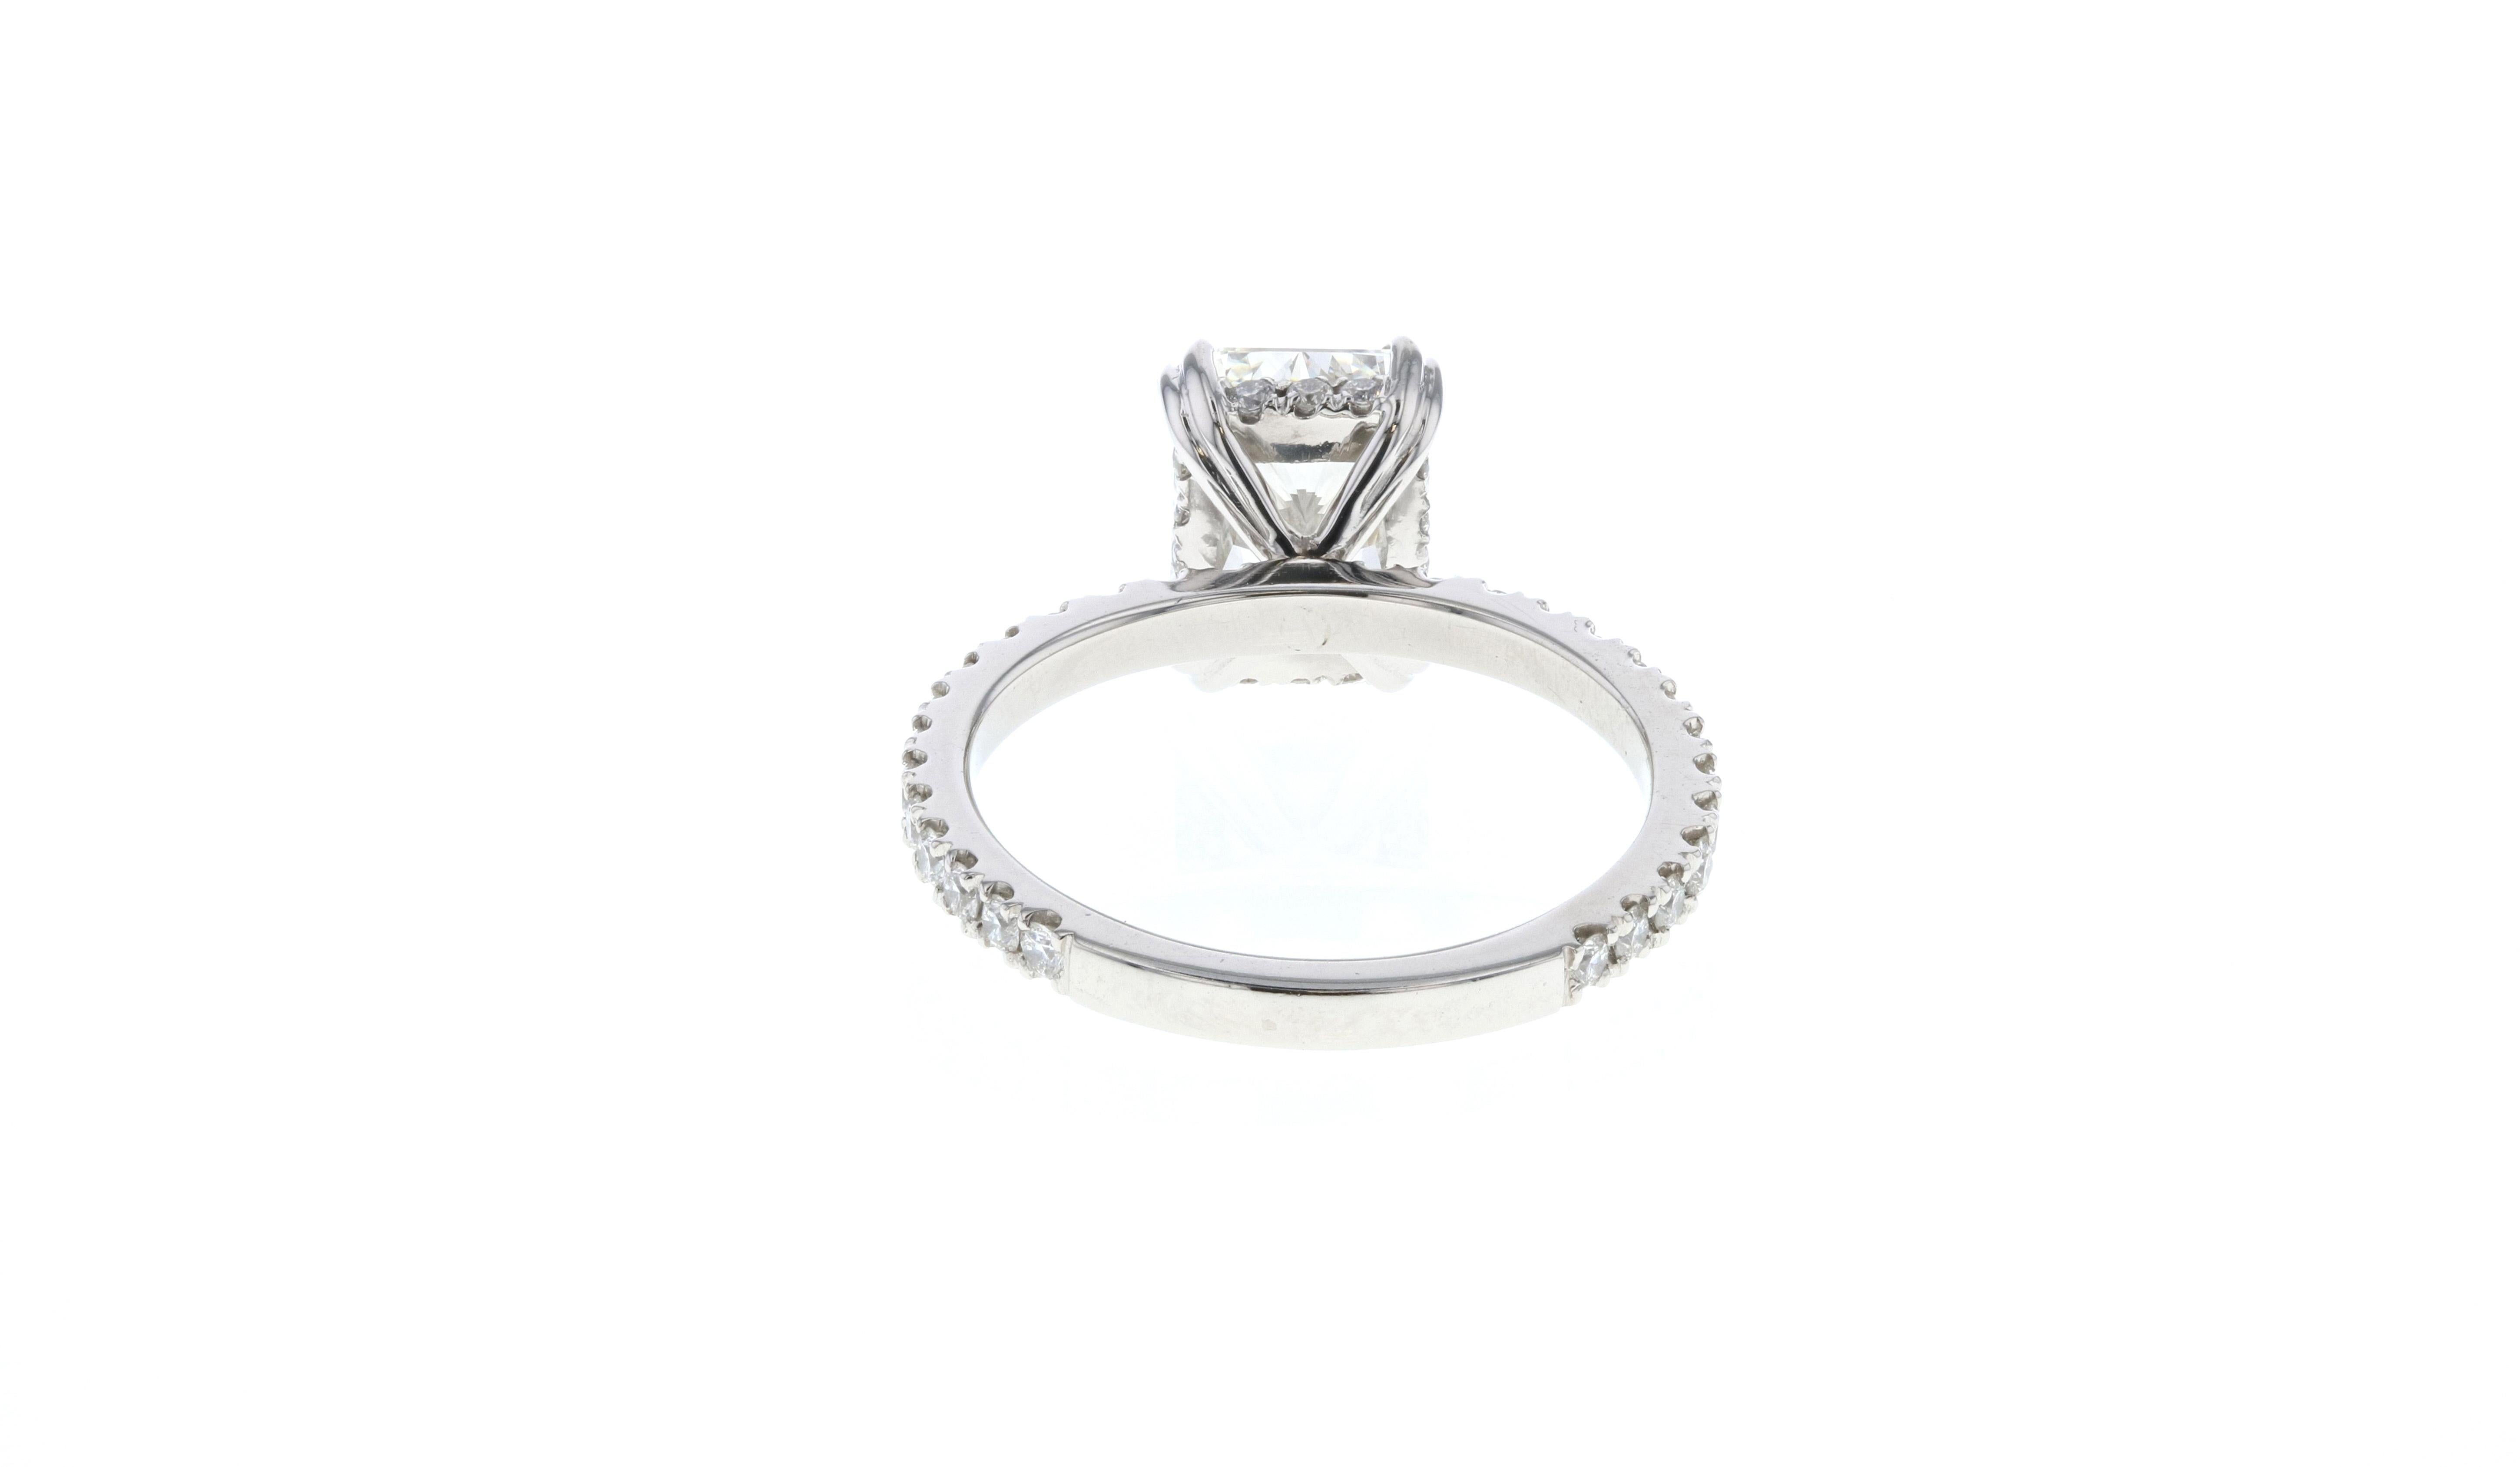 This diamond ring is crafted in platinum, & contains a Radiant shape Diamond (2.01 total carat weight, I color, SI1 clarity), surrounded by 42 round diamonds (0.42 total carat weight, I color, SI clarity).

A hidden halo is the perfect type of